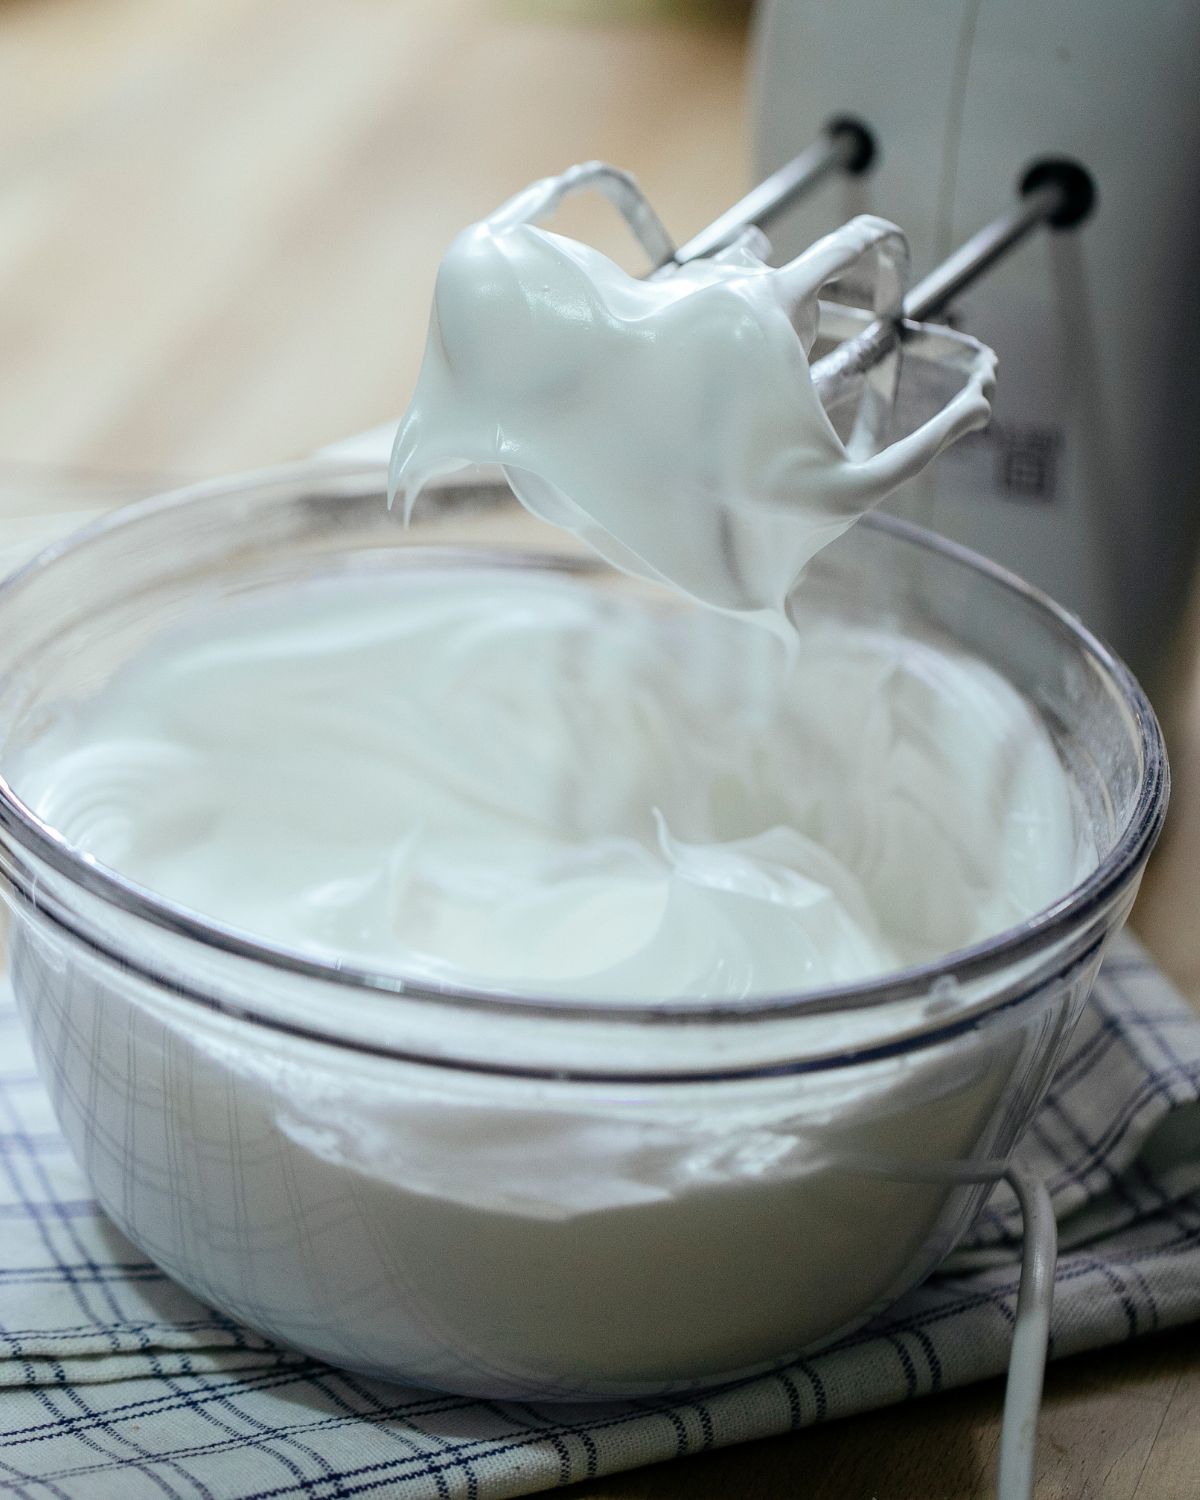 Making the whipped topping.